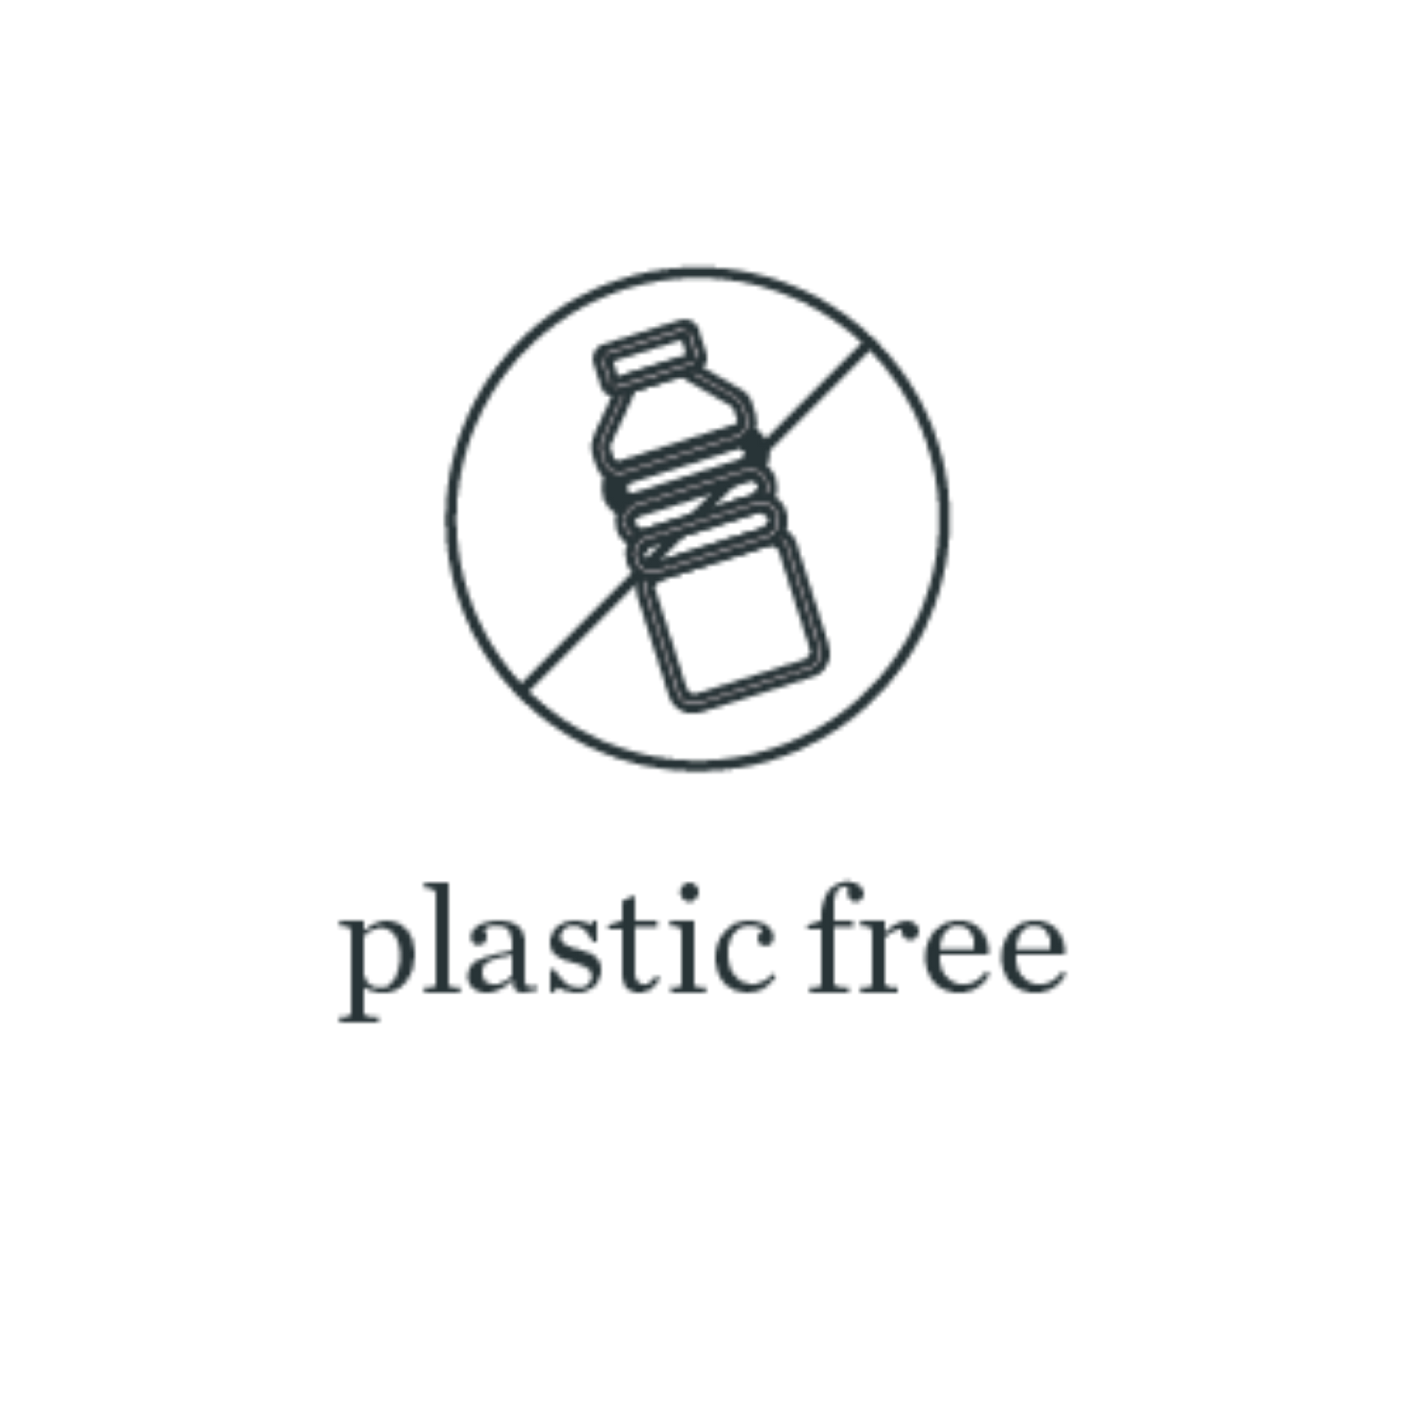 plastic free cleaning